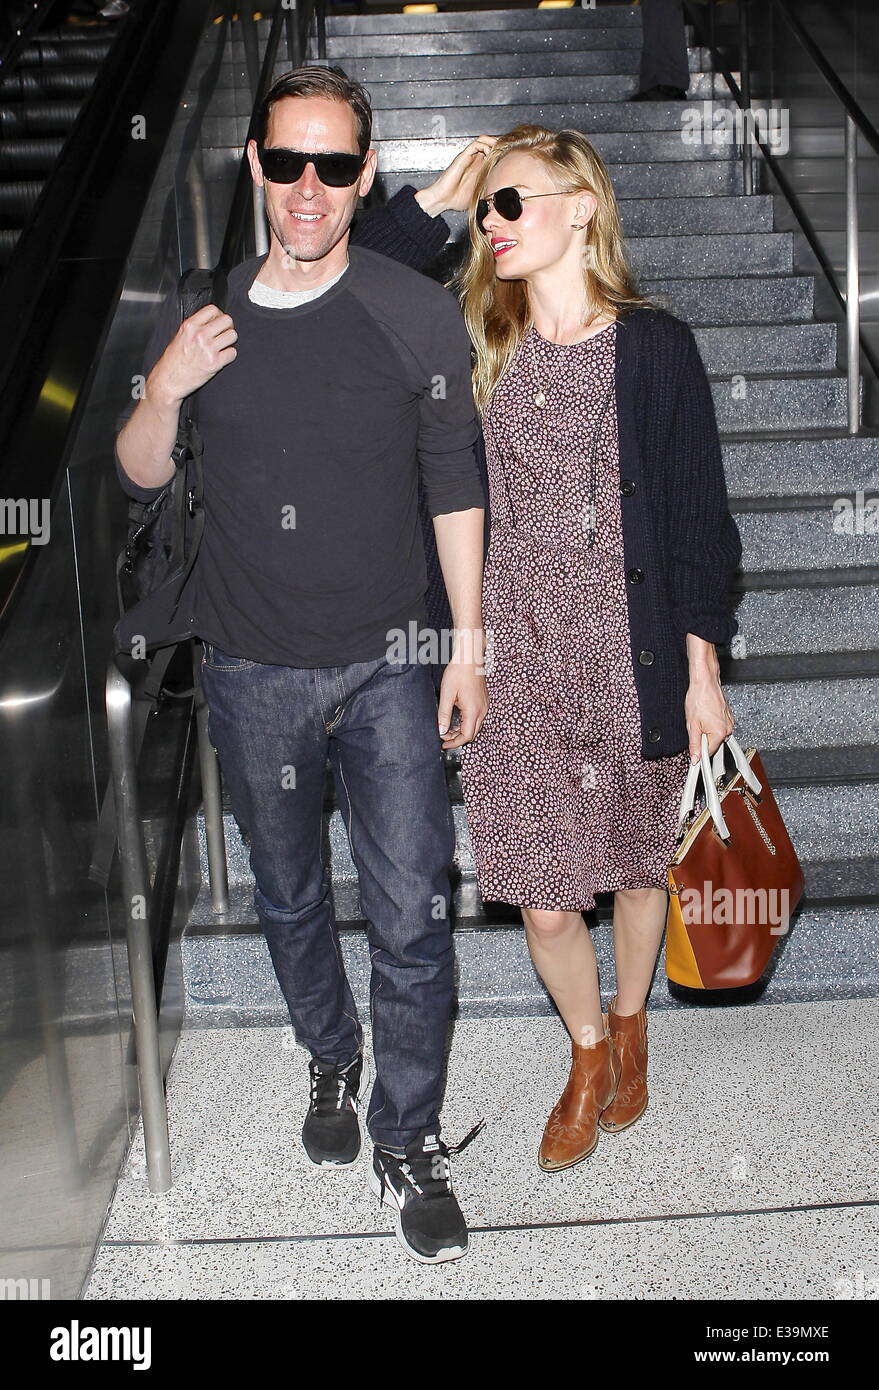 Newlyweds Kate Bosworth and Michael Polish arrive at LAX airport on a flight. The couple married on Saturday (31Aug) during an outdoor ceremony at The Ranch at Rock Creek in Philipsburg, Montana.  Featuring: Kate Bosworth,Michael Polish Where: Los Angeles Stock Photo